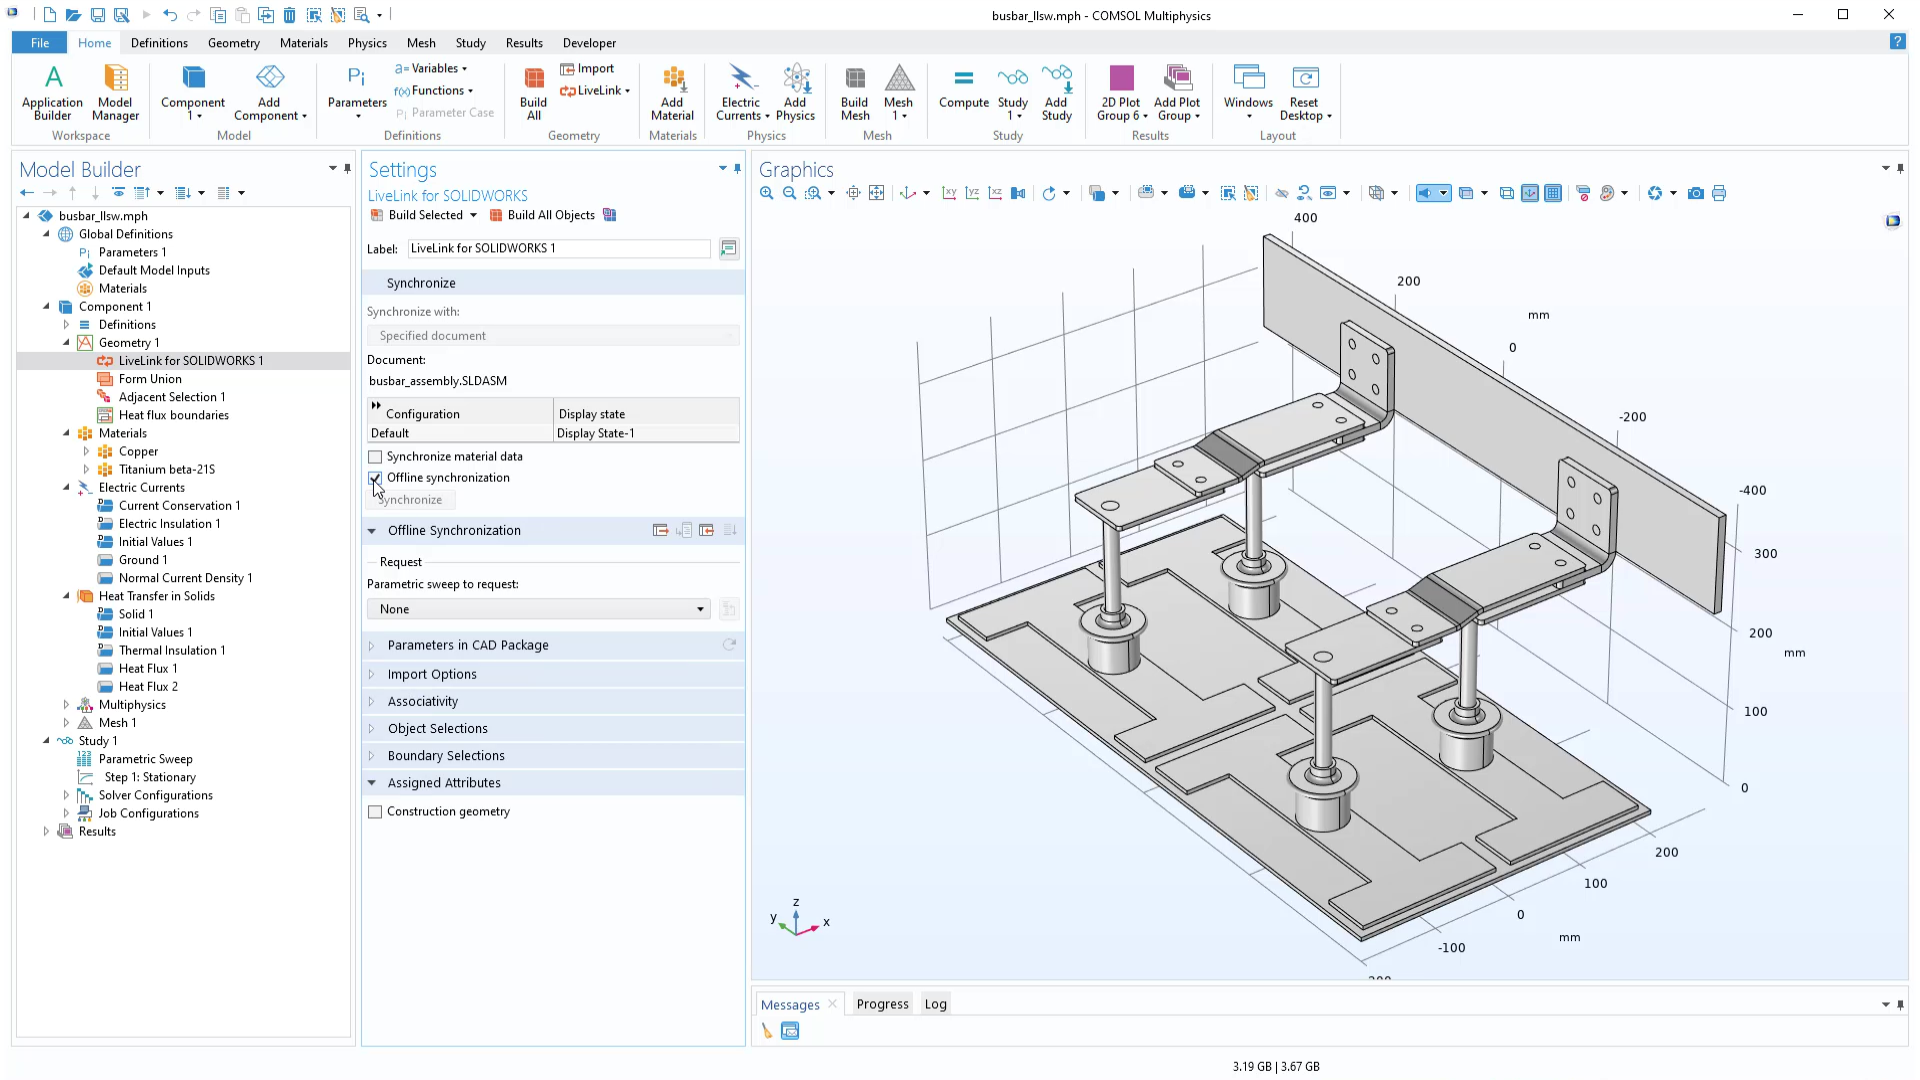 The COMSOL Multiphysics version 6.0 UI with a busbar geometry in the Graphics window and the settings for LiveLink for SOLIDWORKS with the Offline Synchronization section expanded.